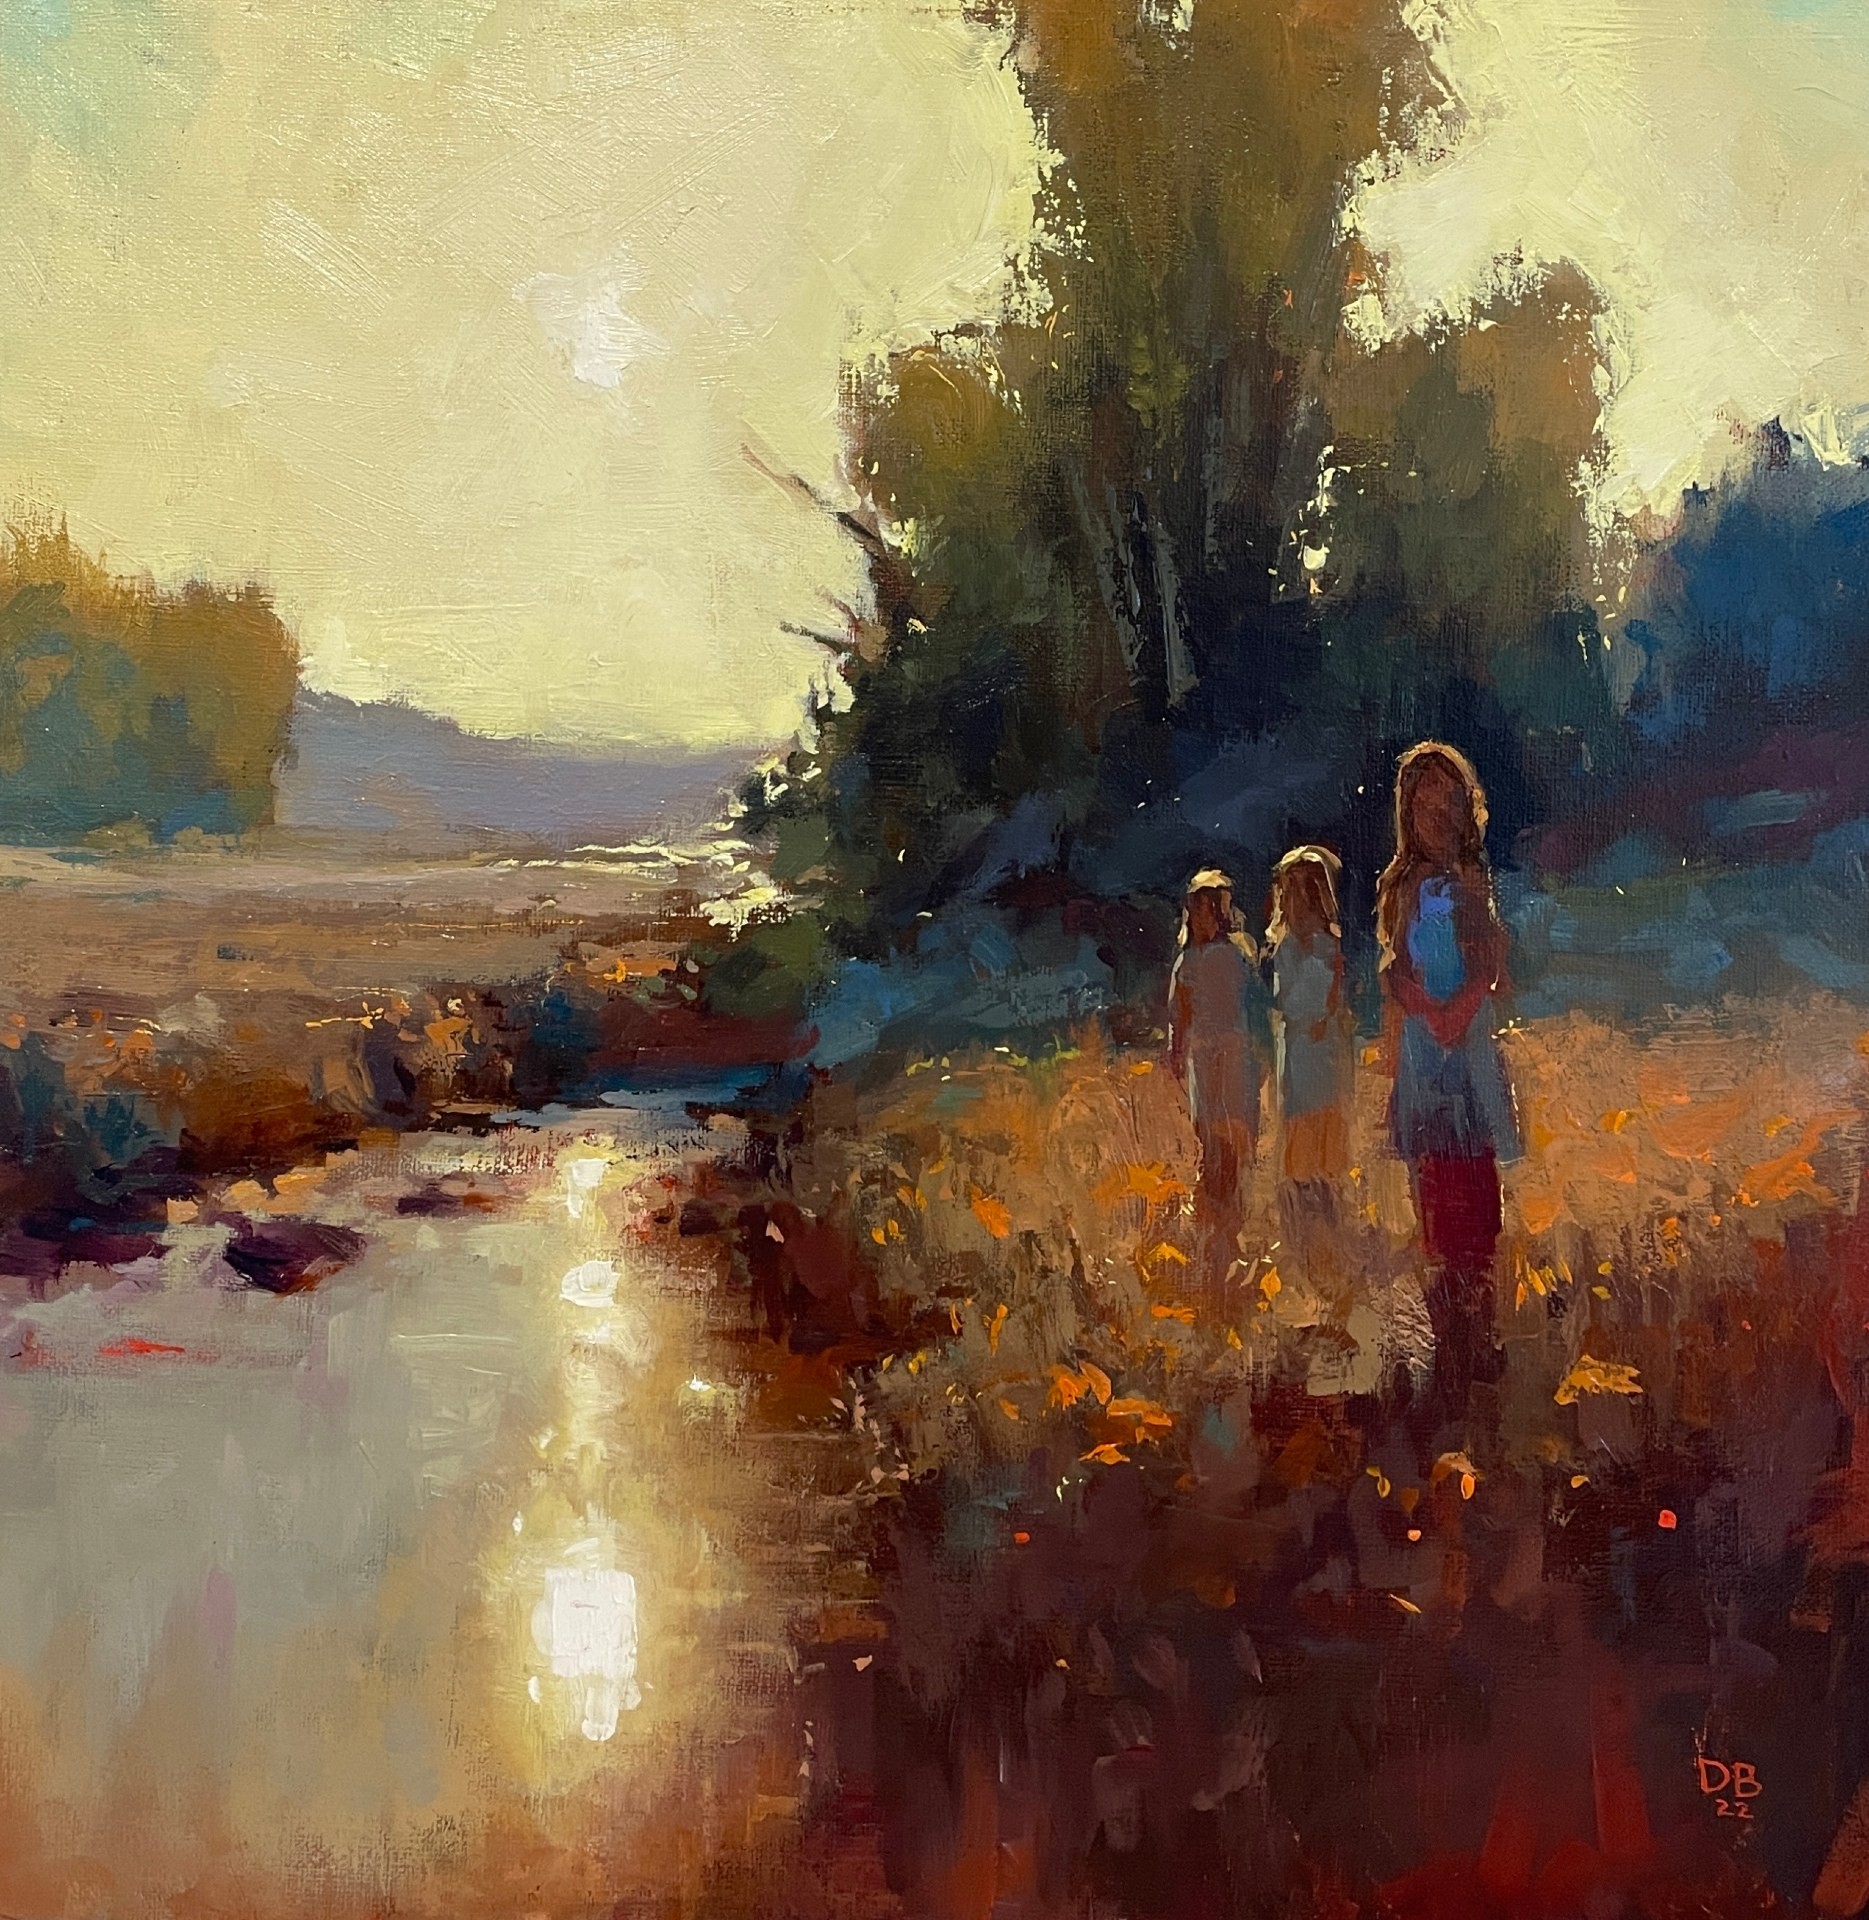 12th Annual PleinAir Salon Art Competition Annual Awards Semi-Finalist Daniel Bailey The Light of Our Life children in landscape oil painting